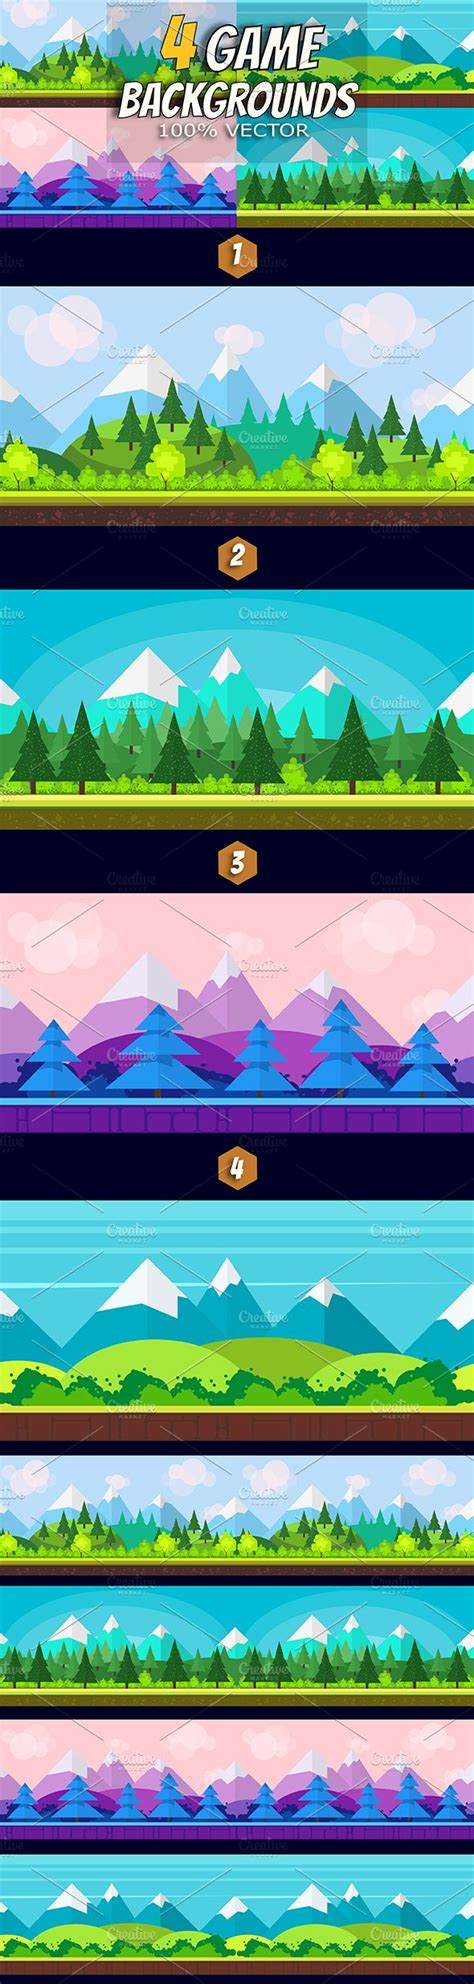 Flat Game Constructor 6 Backgrounds Illustrator Graphics ~ Creative